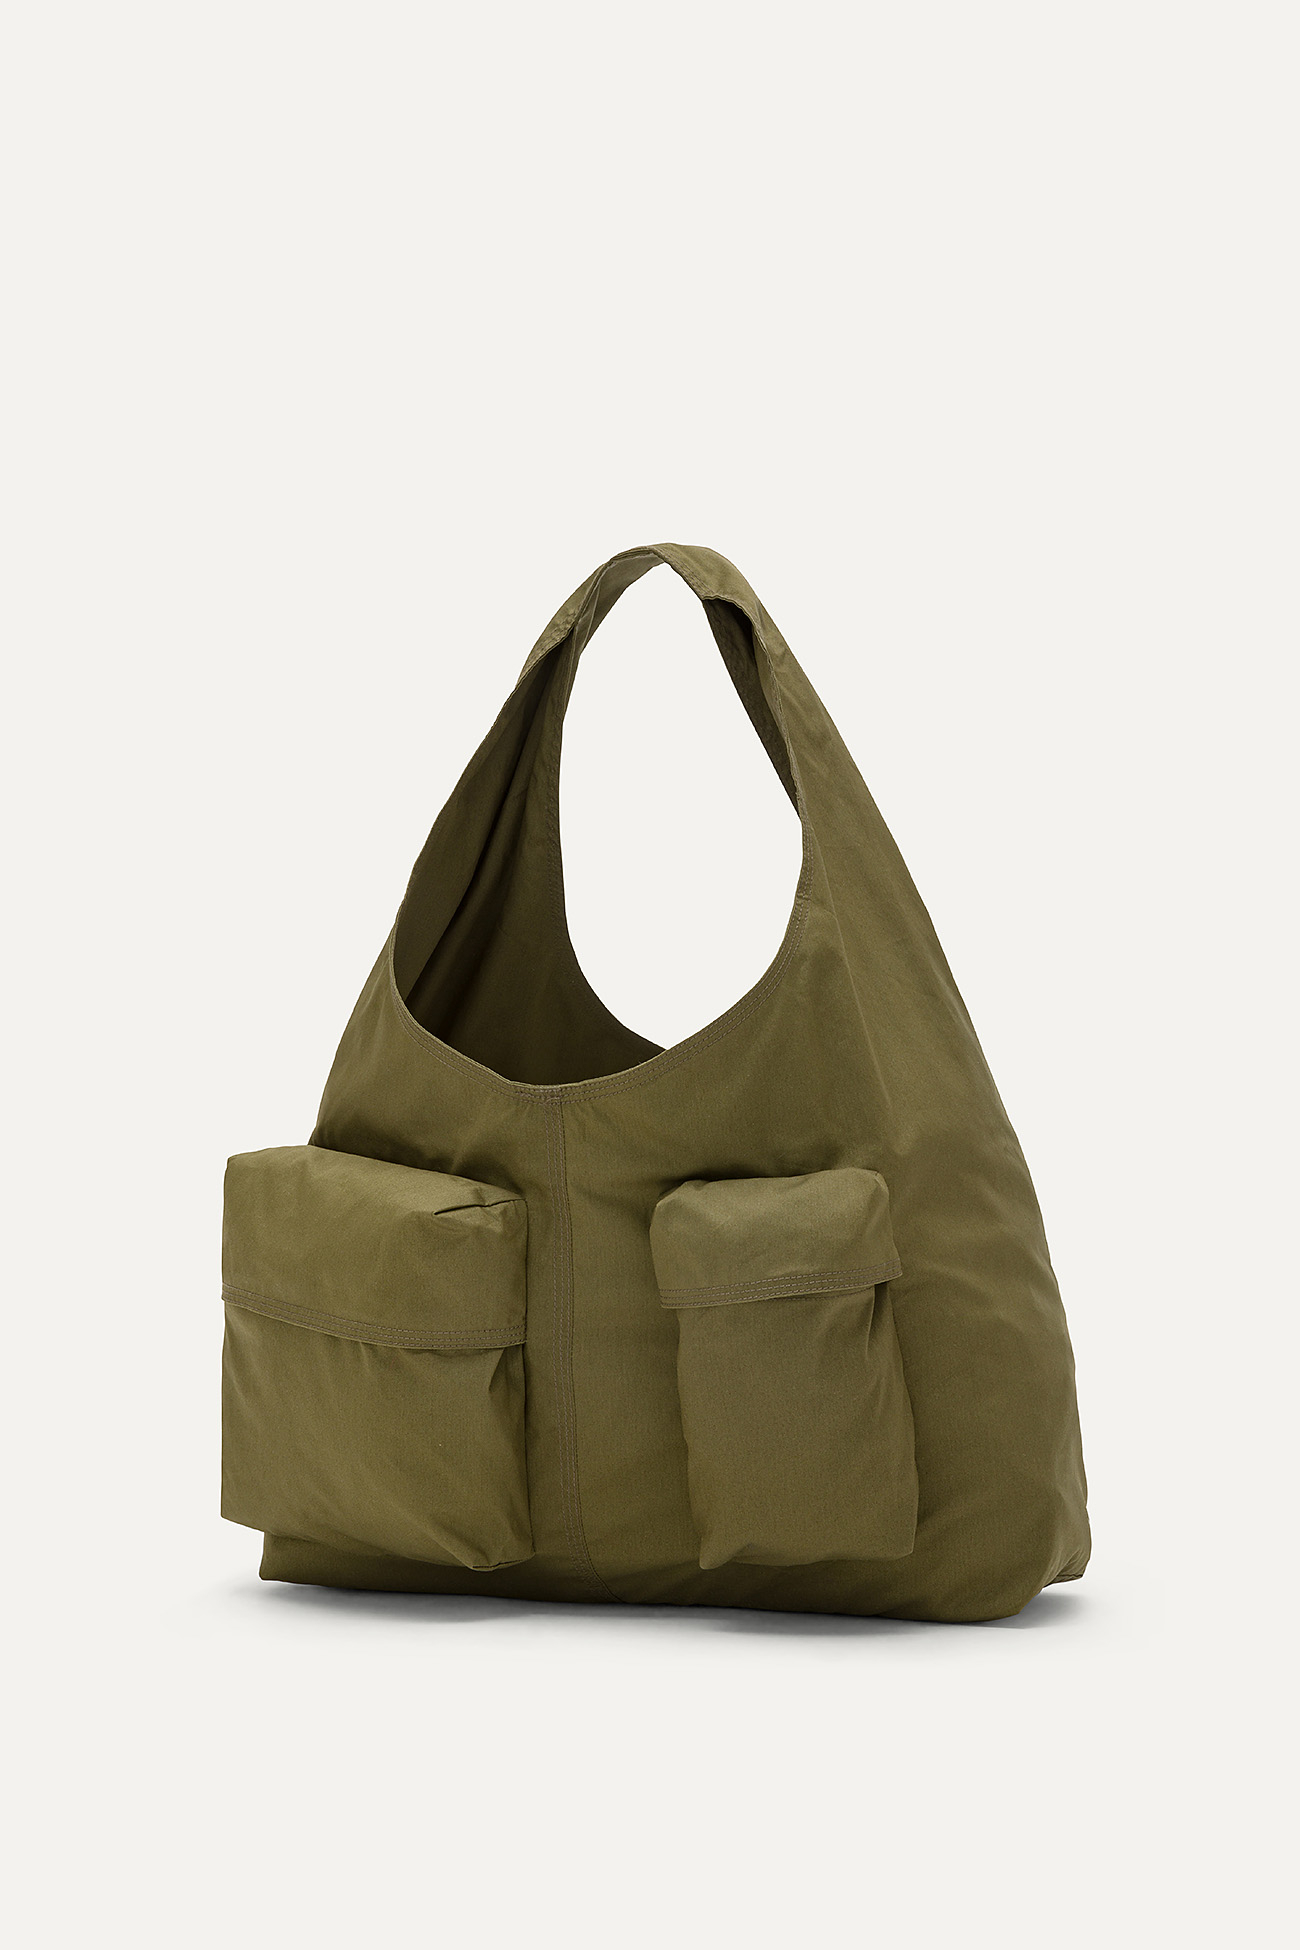 BAG WITH POCKETS IN COTTON GABARDINE 3085 - FOREST GREEN - OOF WEAR